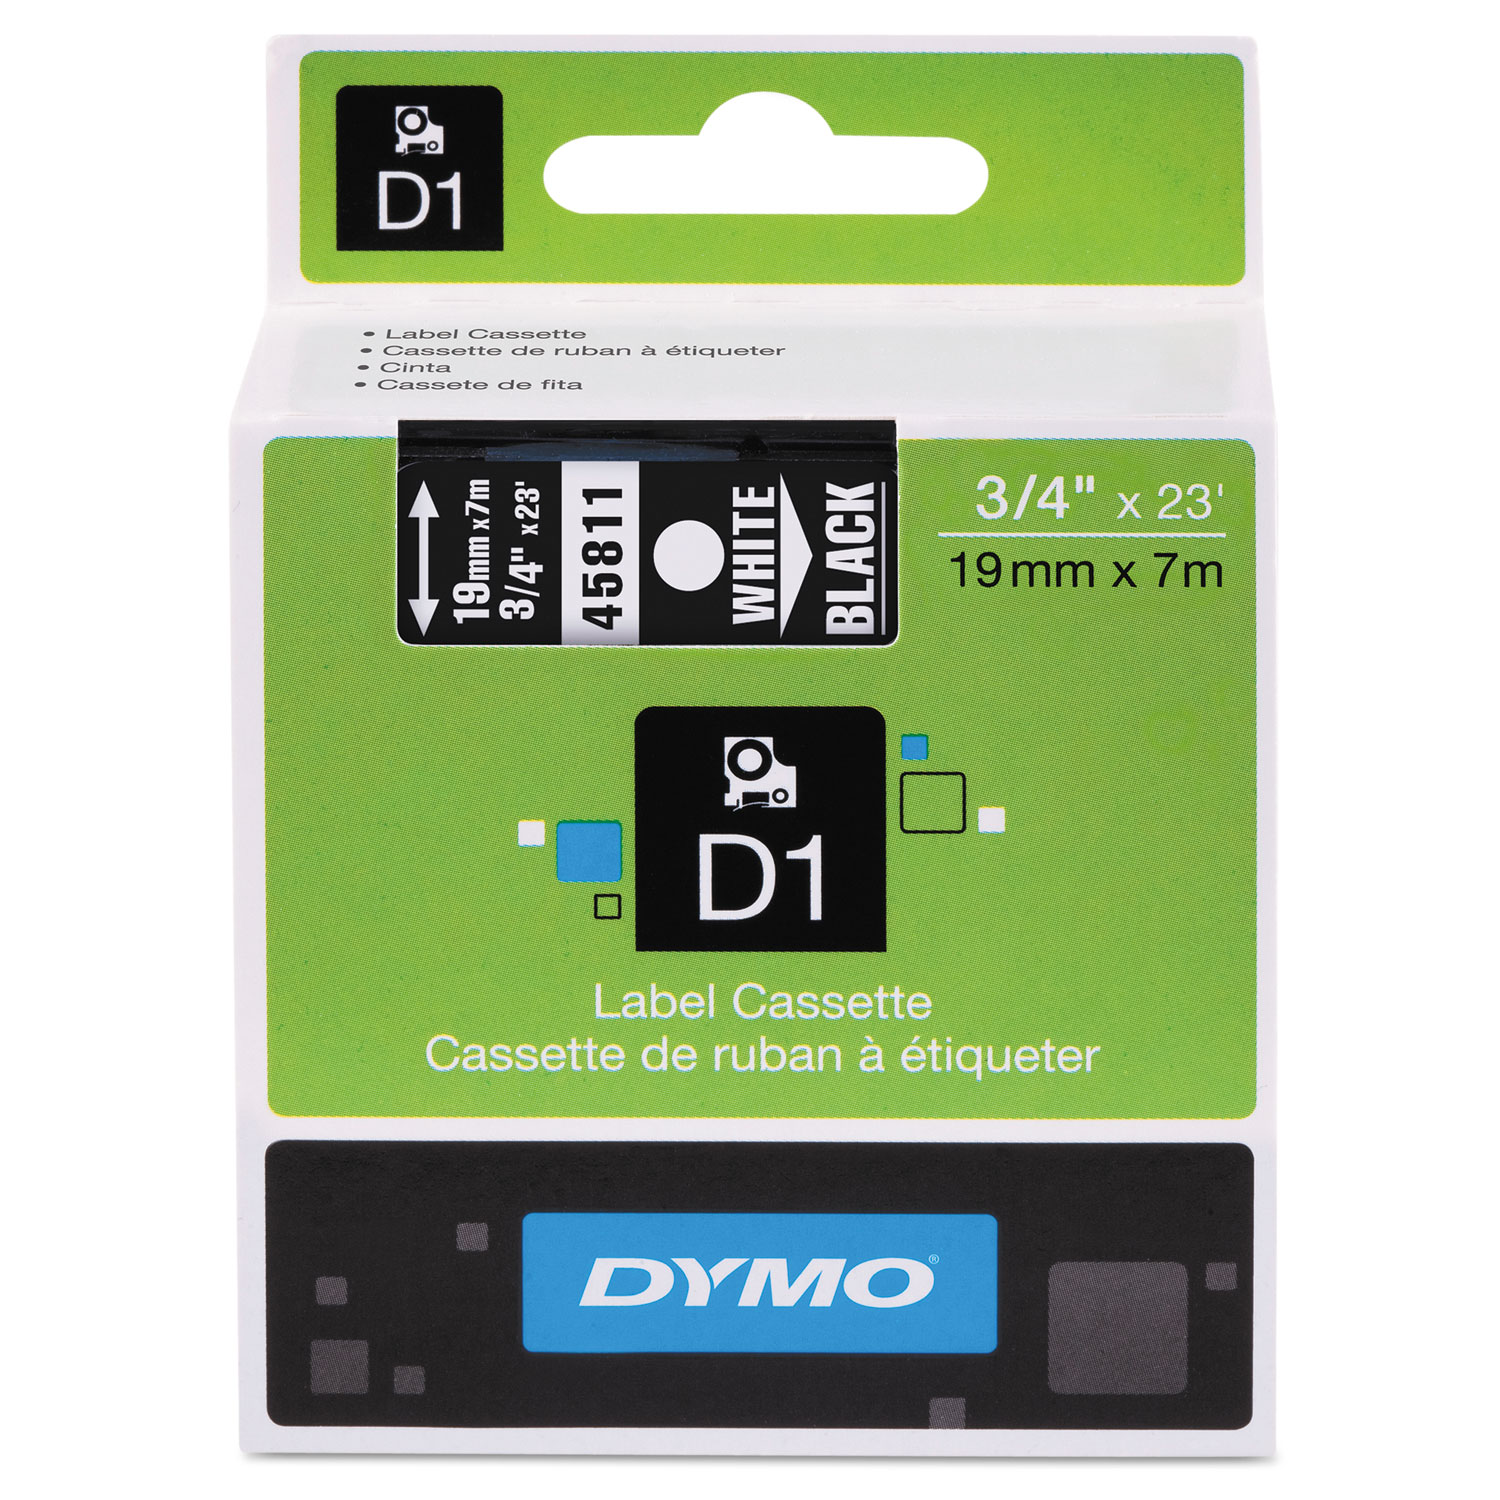  DYMO 45811 D1 High-Performance Polyester Removable Label Tape, 0.75 x 23 ft, White on Black (DYM45811) 